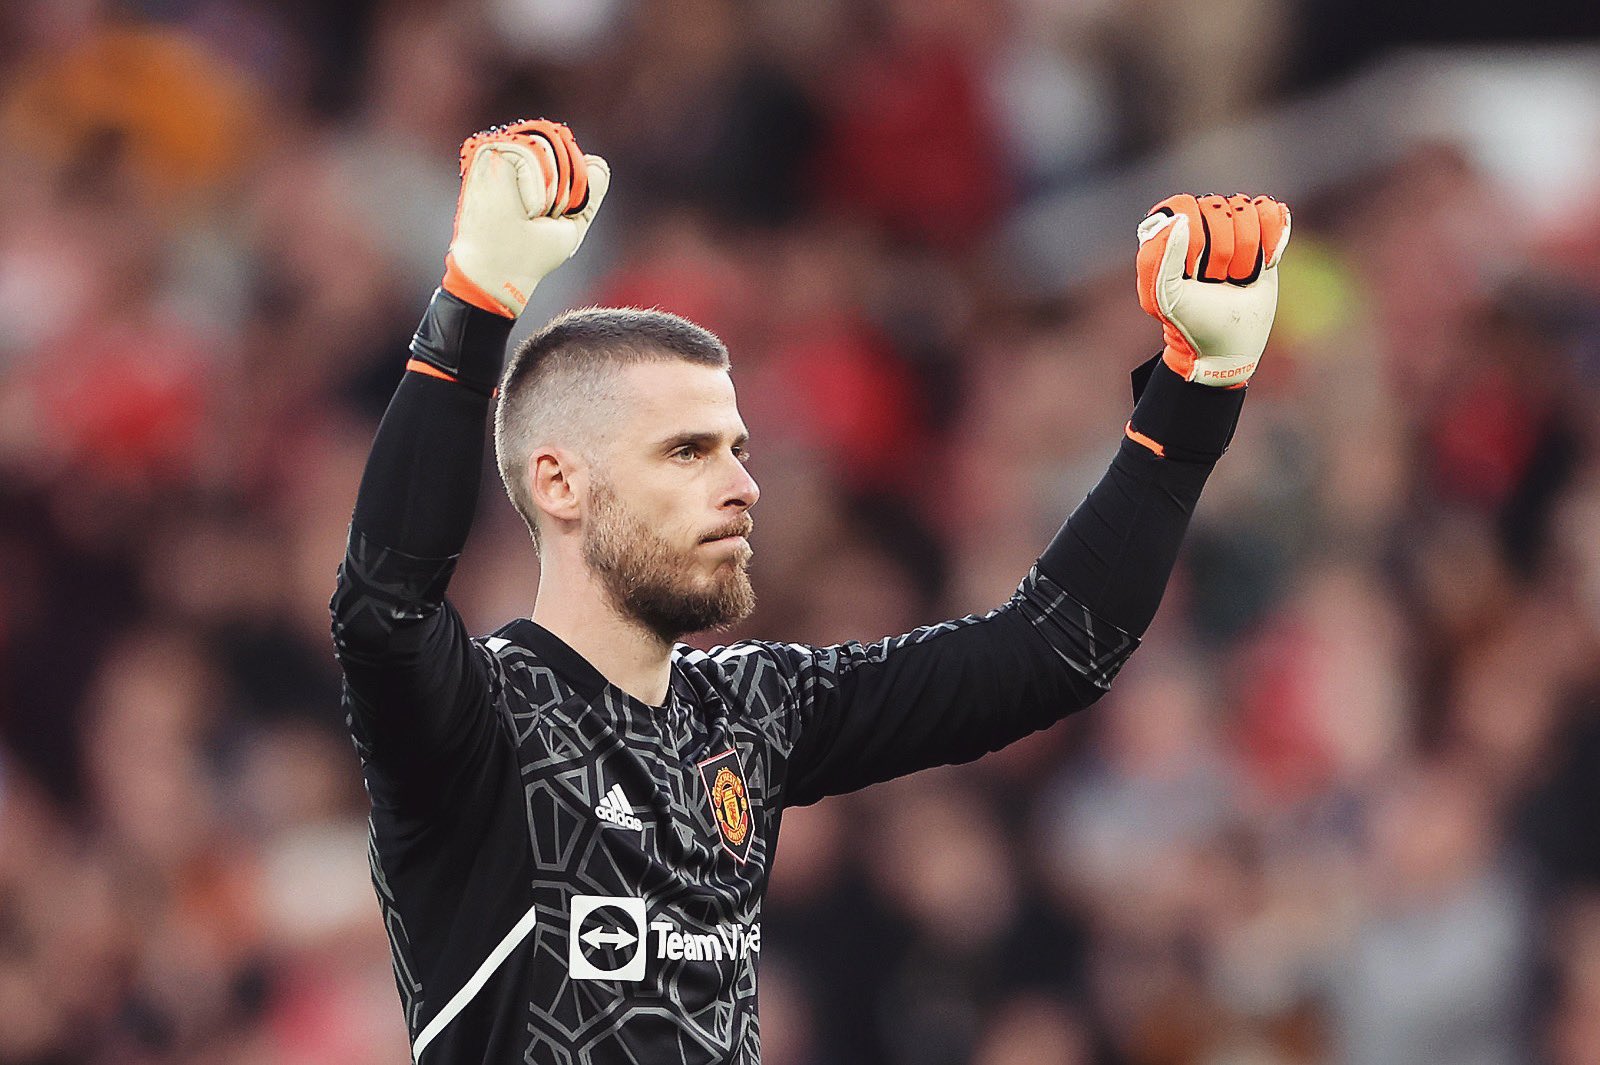 David De Gea could make shock return to Atletico Madrid as replacement for Jan Oblak